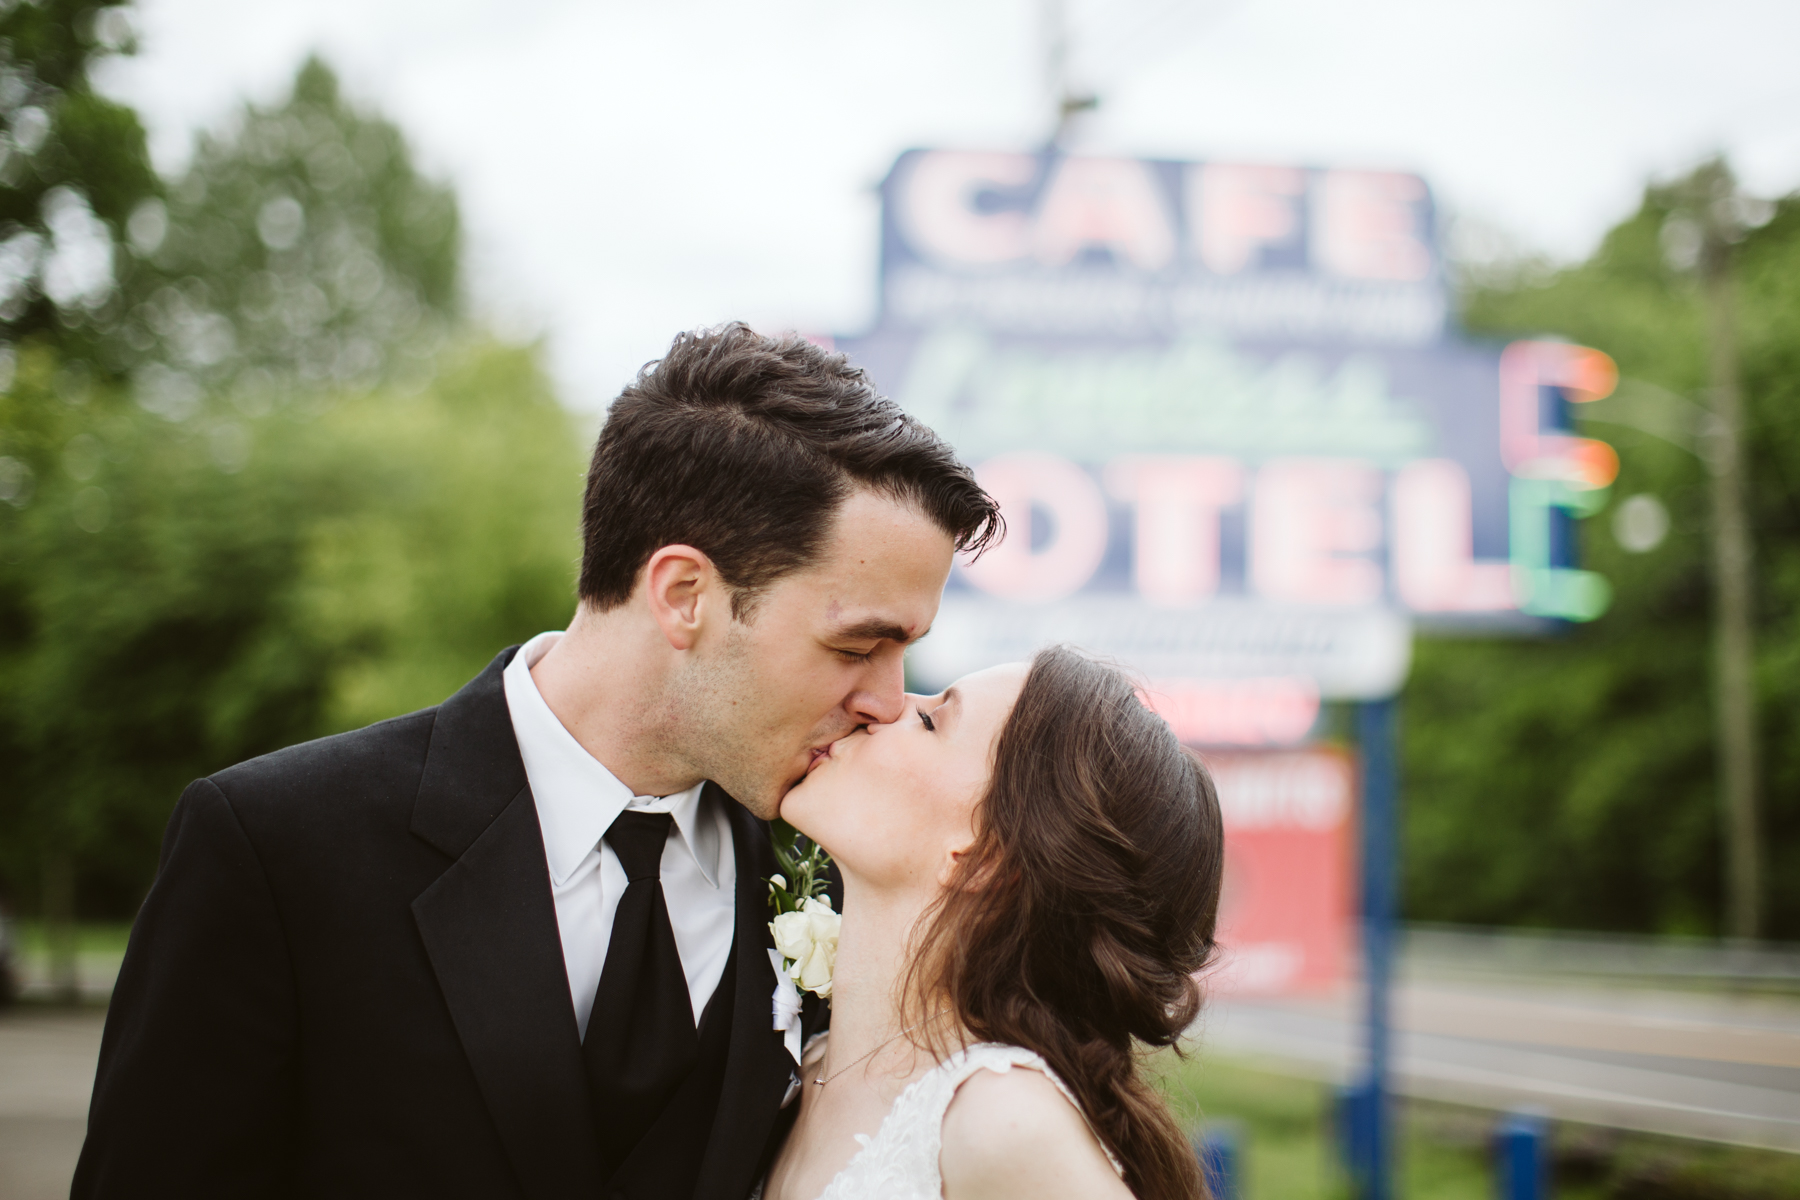 Wedding reception at the loveless cafe and barn in nashville, tennessee